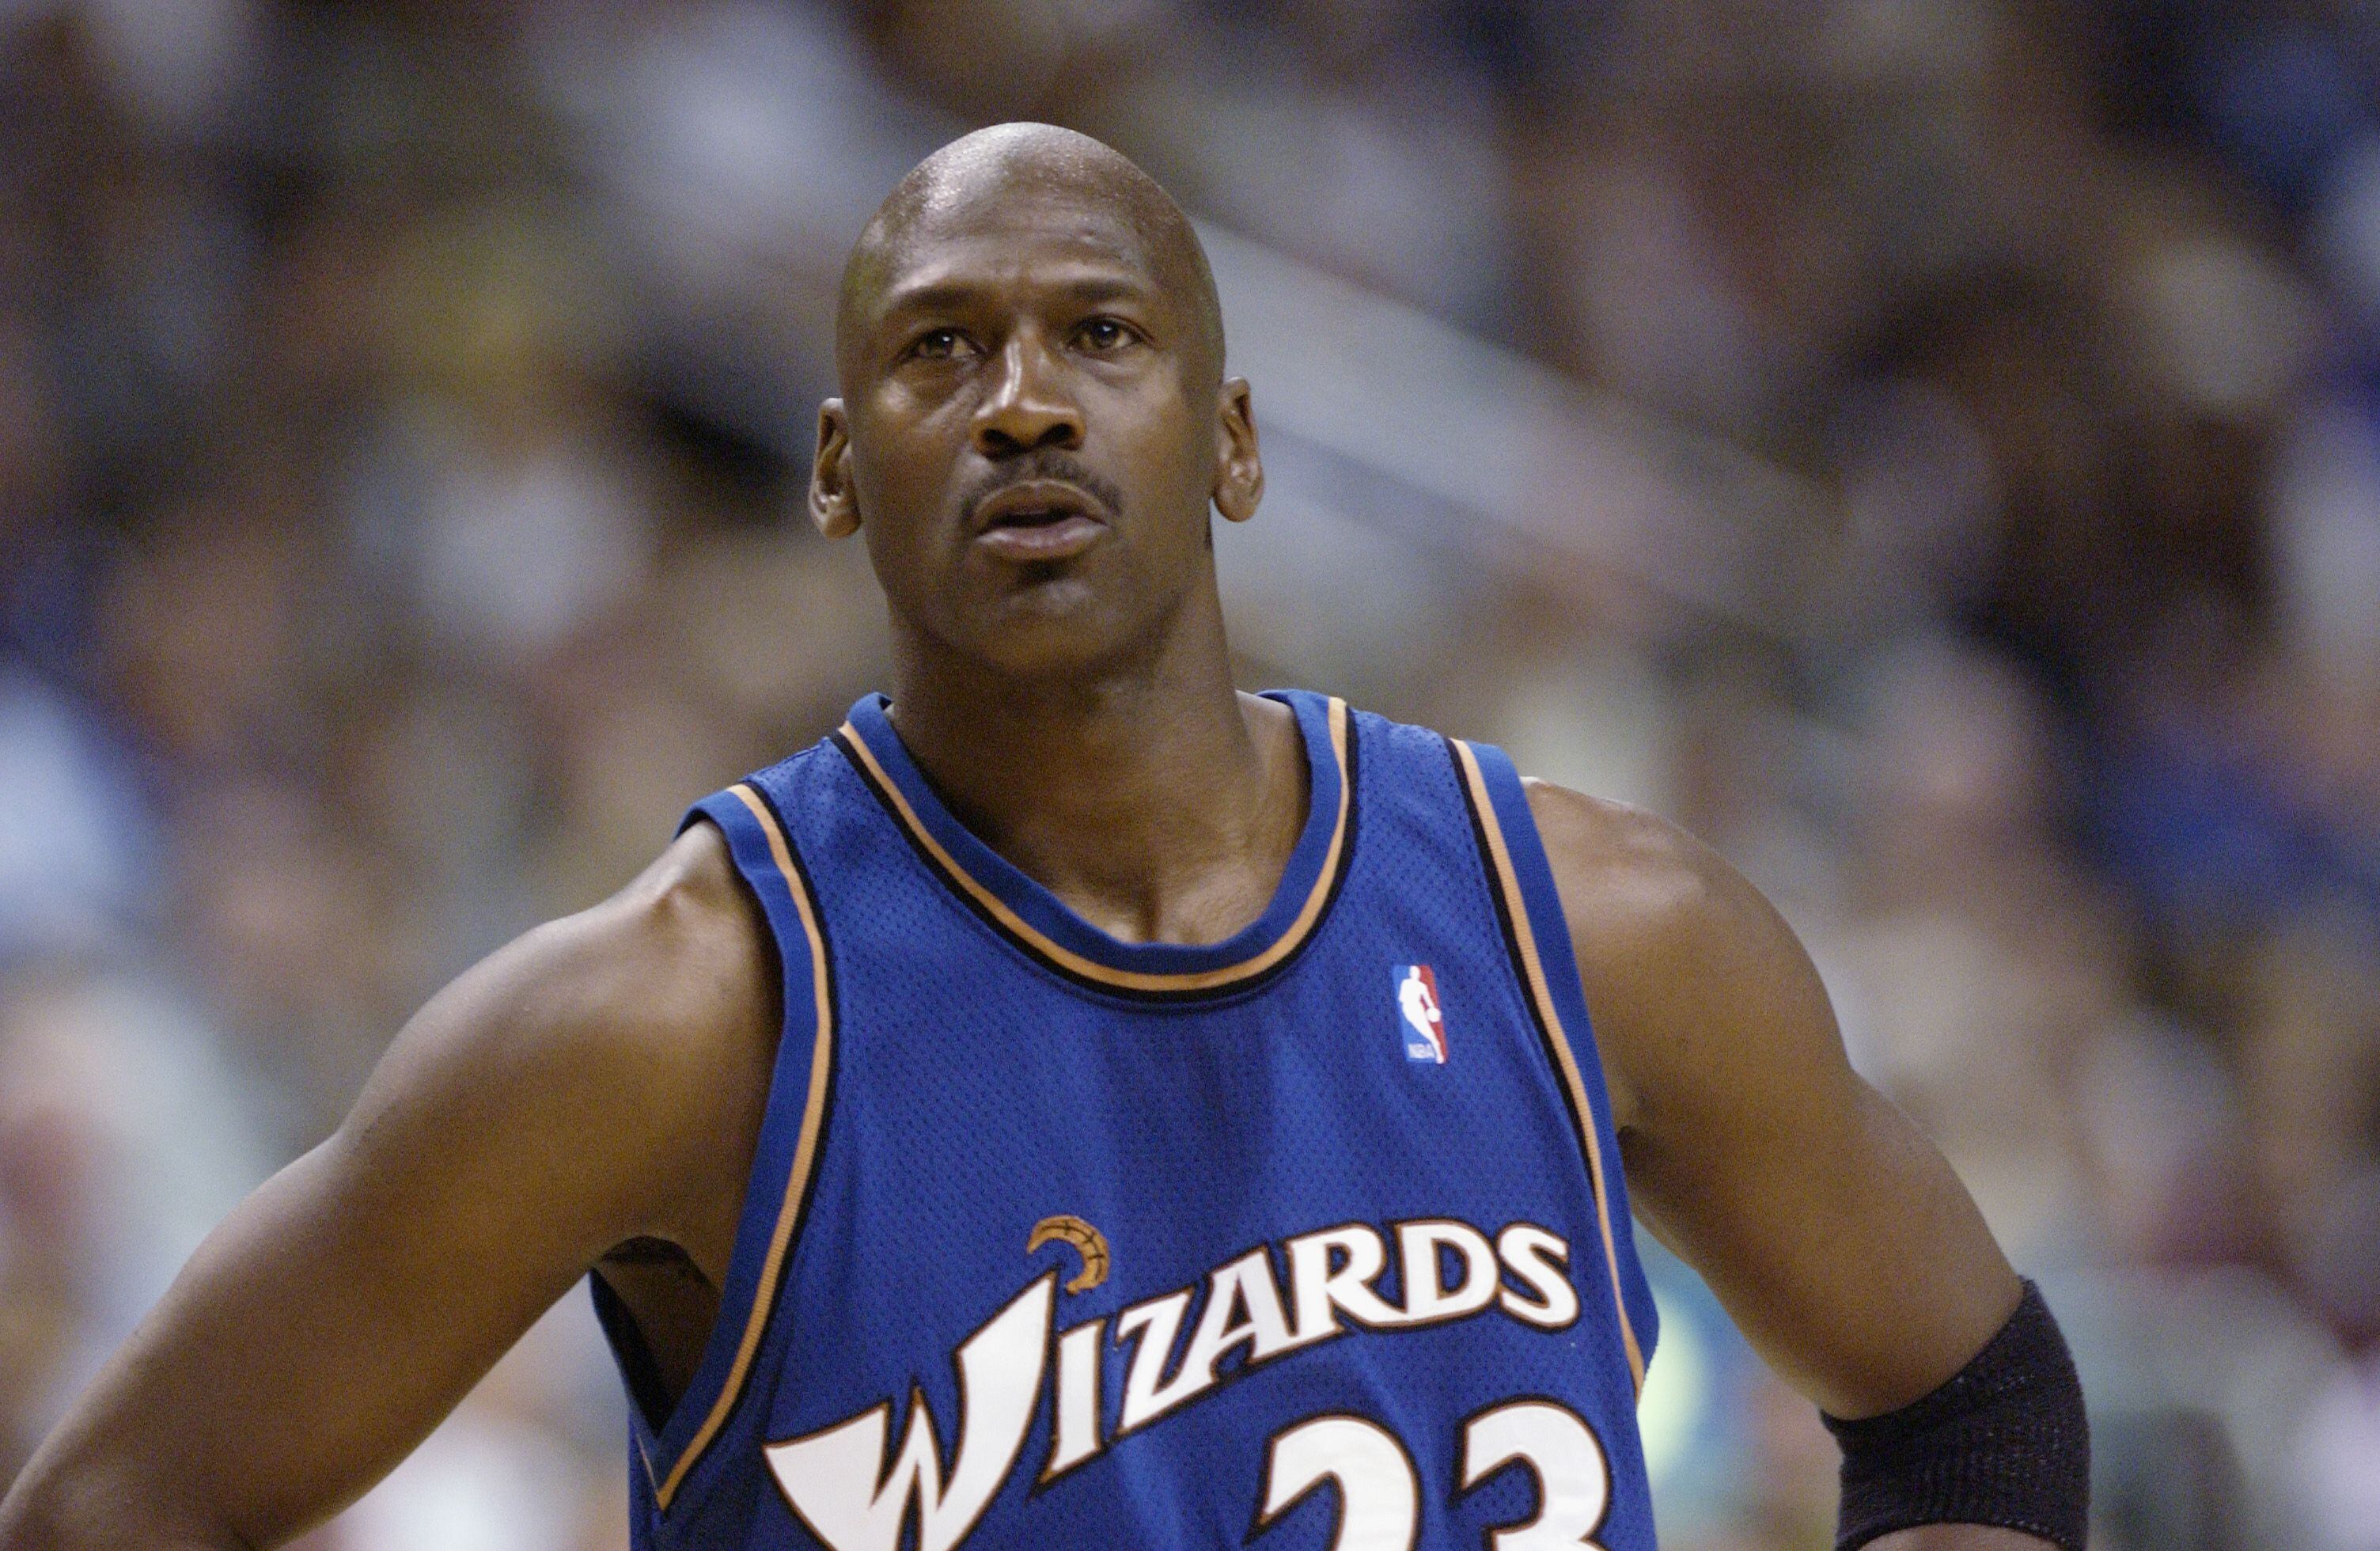 Michael Jordan Jersey From 1998 NBA Finals Fetches Record Price - Sports  Illustrated